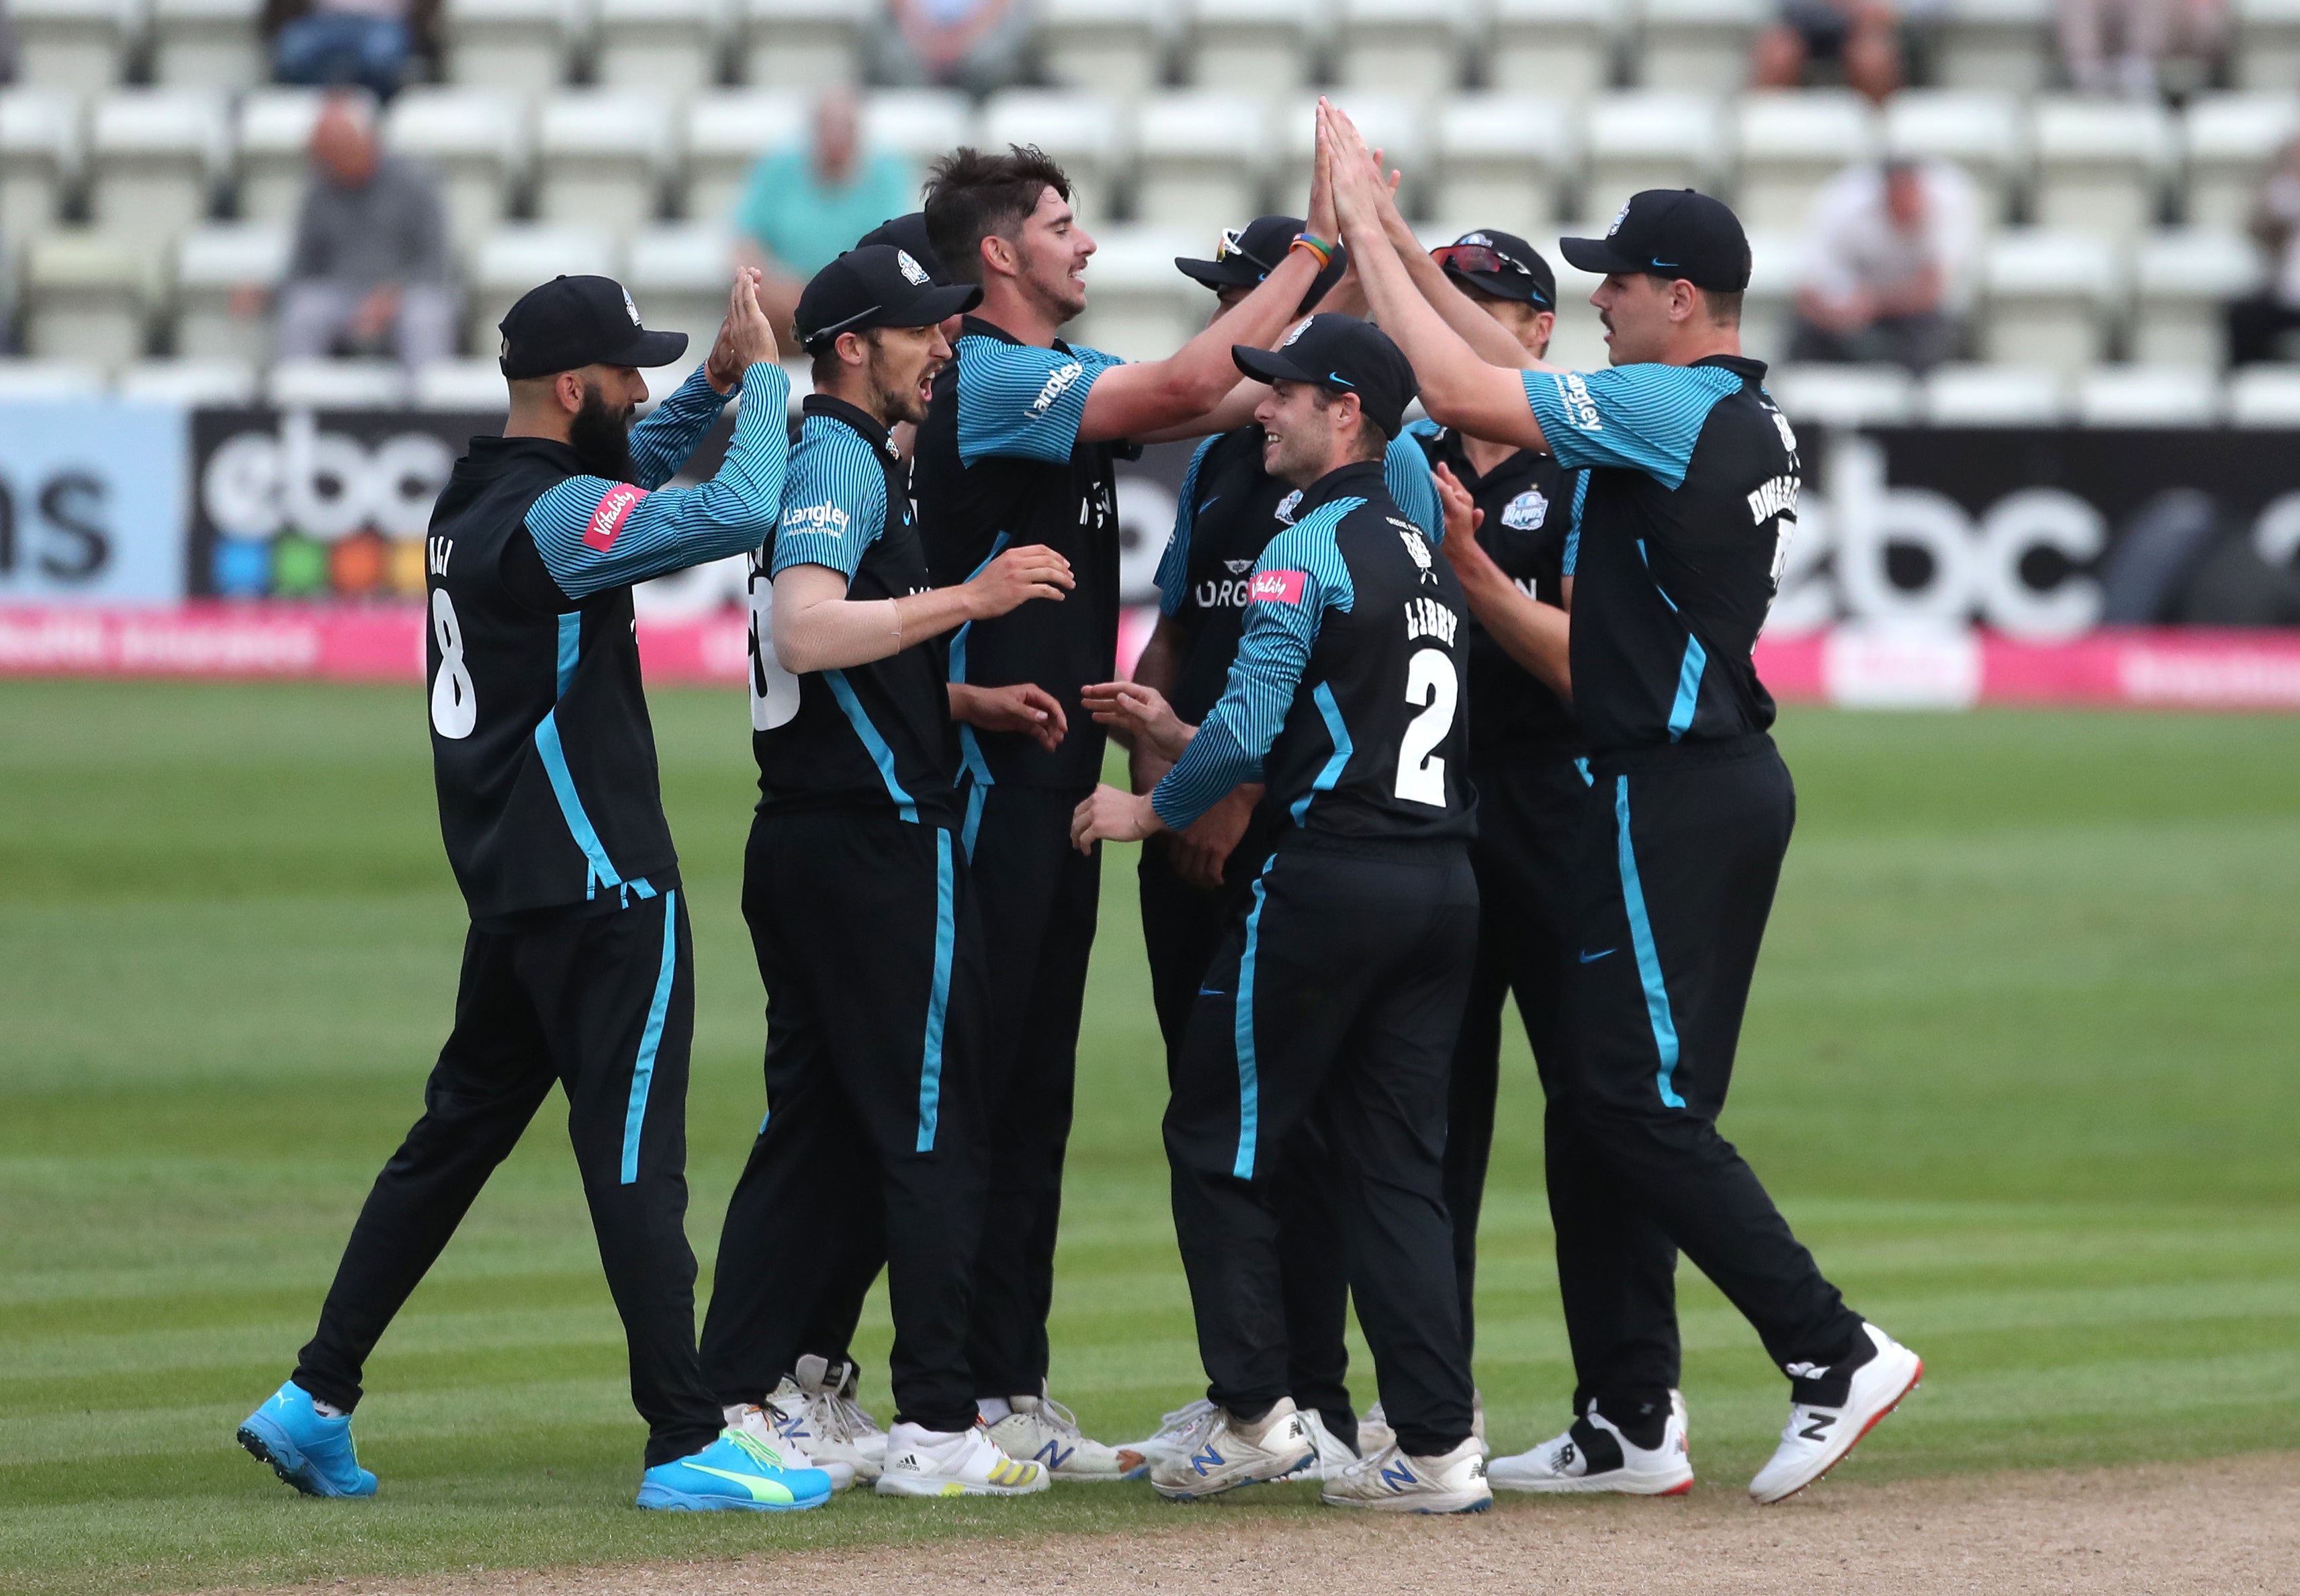 Worcestershire Rapids’ Josh Tongue (centre) and team-mates celebrate taking the wicket of Notts Outlaws’ Peter Trego resulting in a tie game during the Vitality T20 Blast match at the New Road